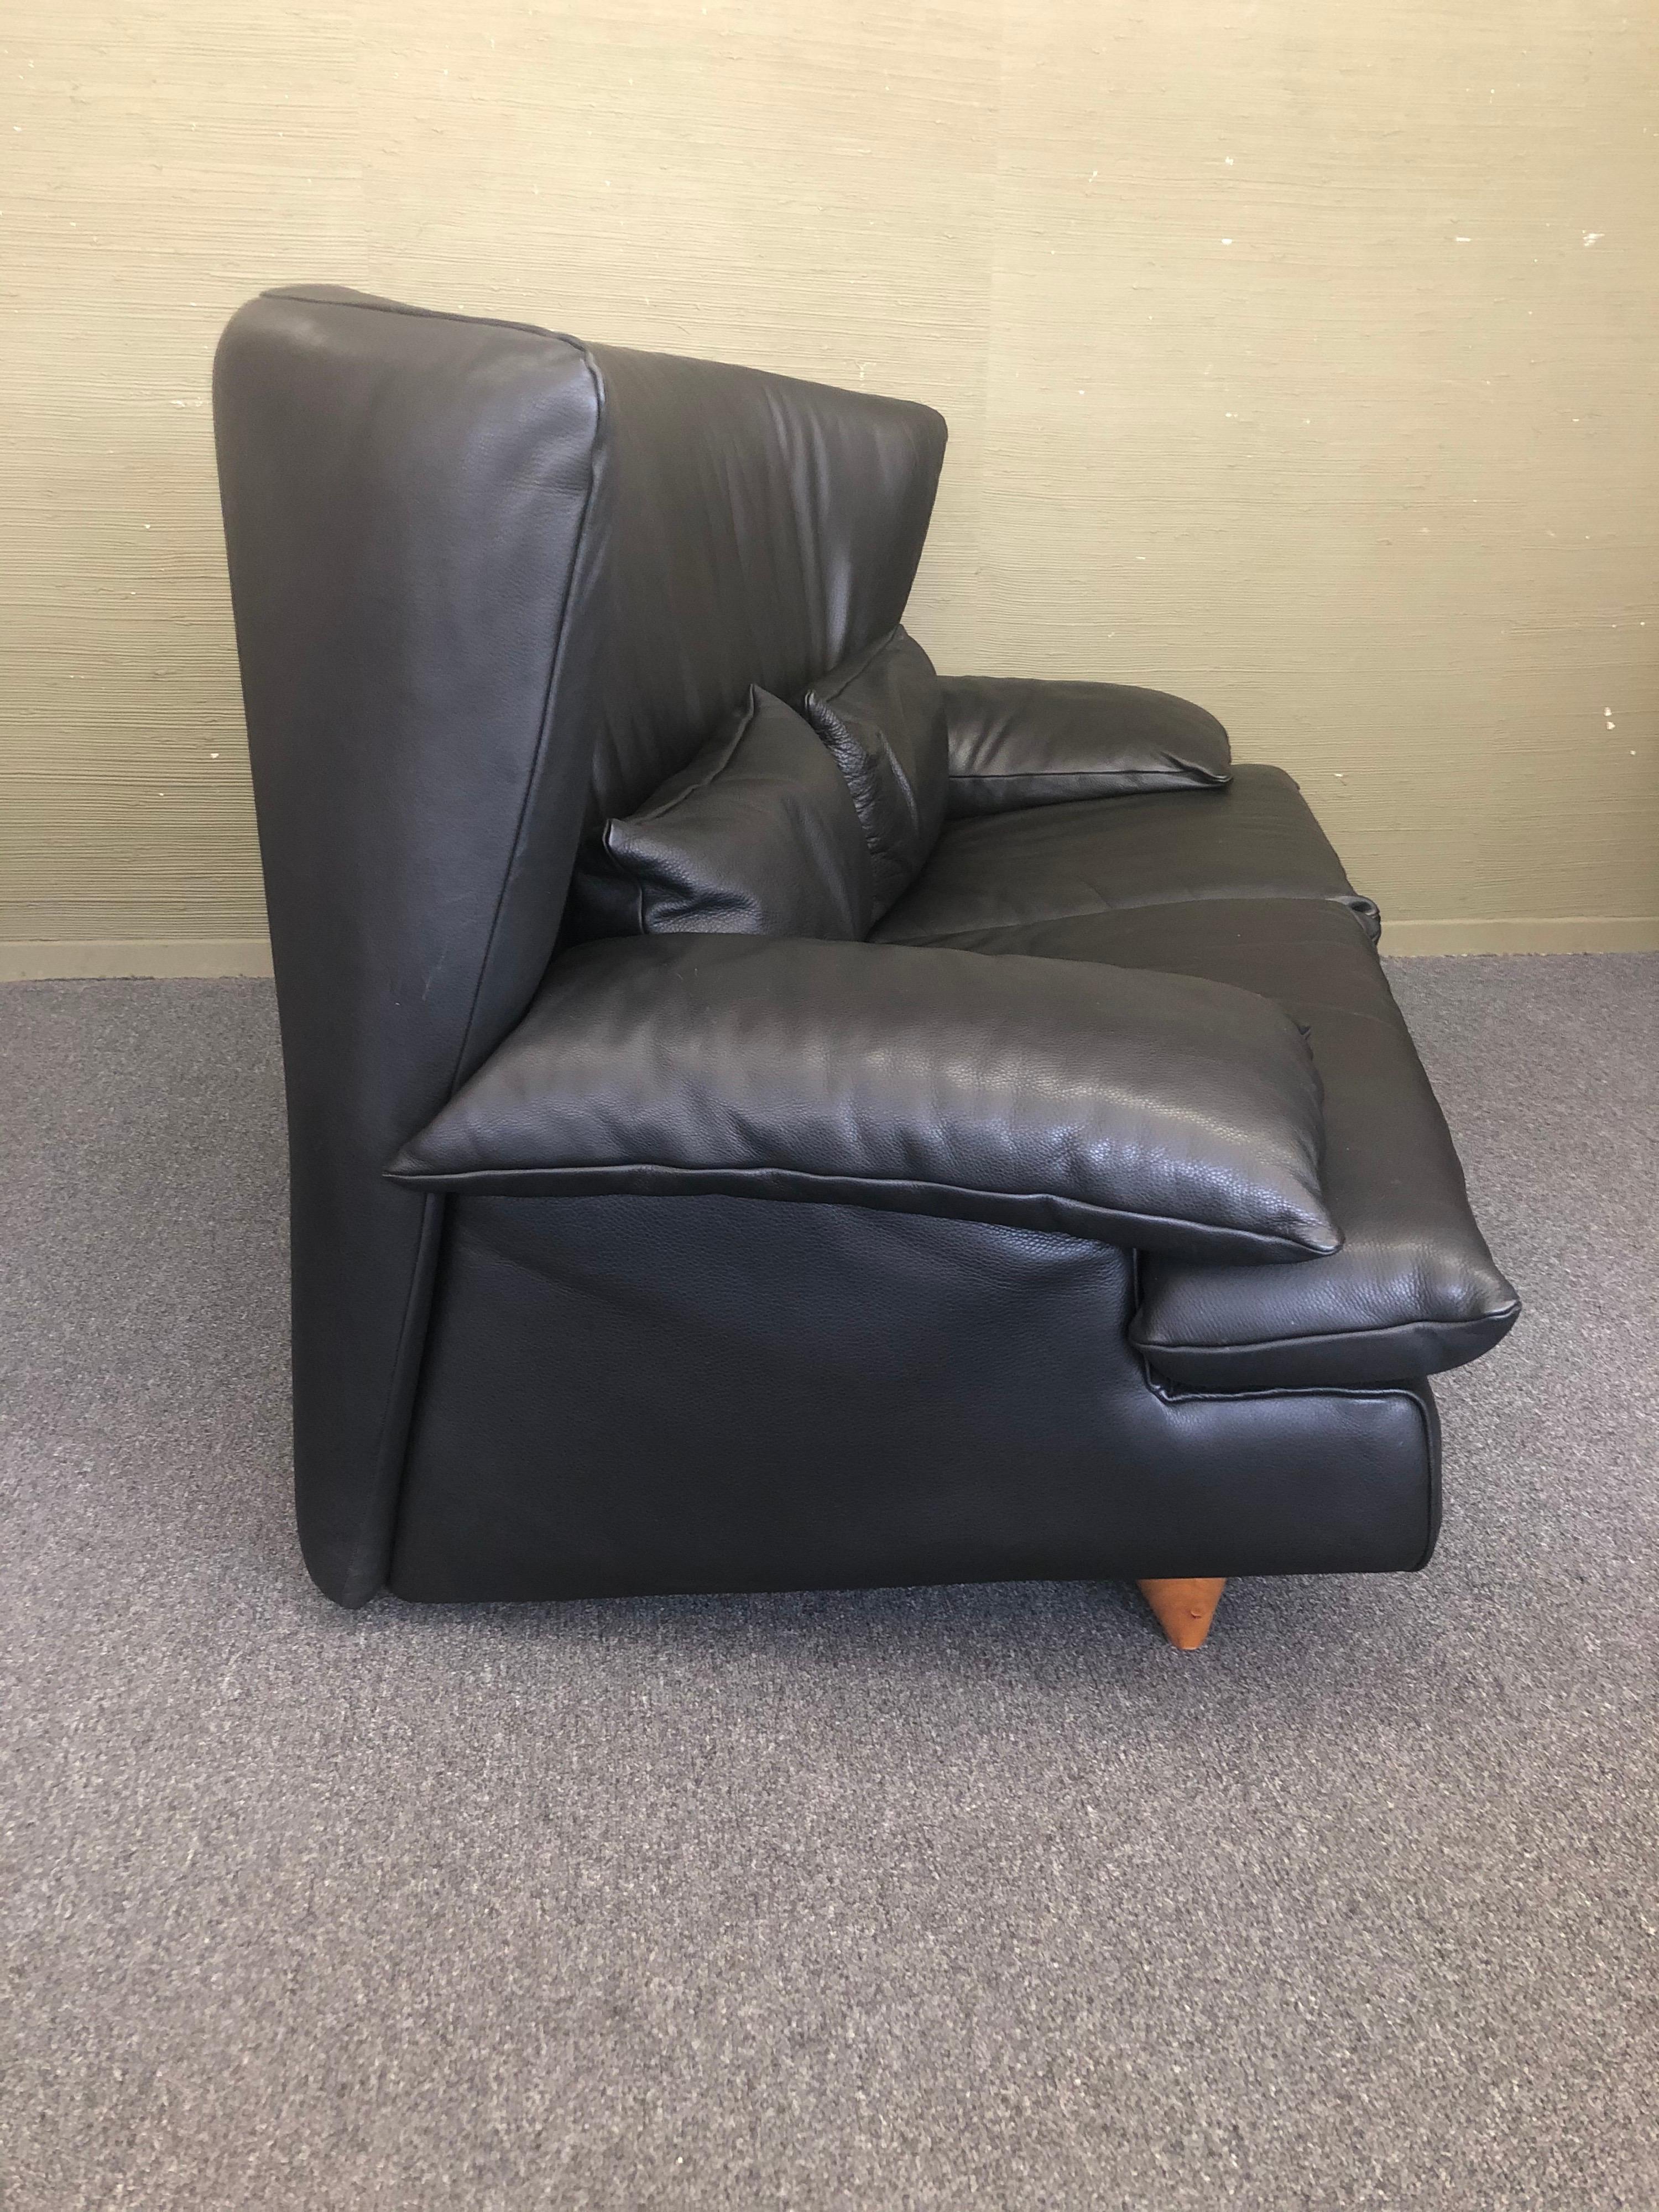 20th Century Italian Black Leather Postmodern Loveseat by i4 Mariani for the Pace Collection For Sale